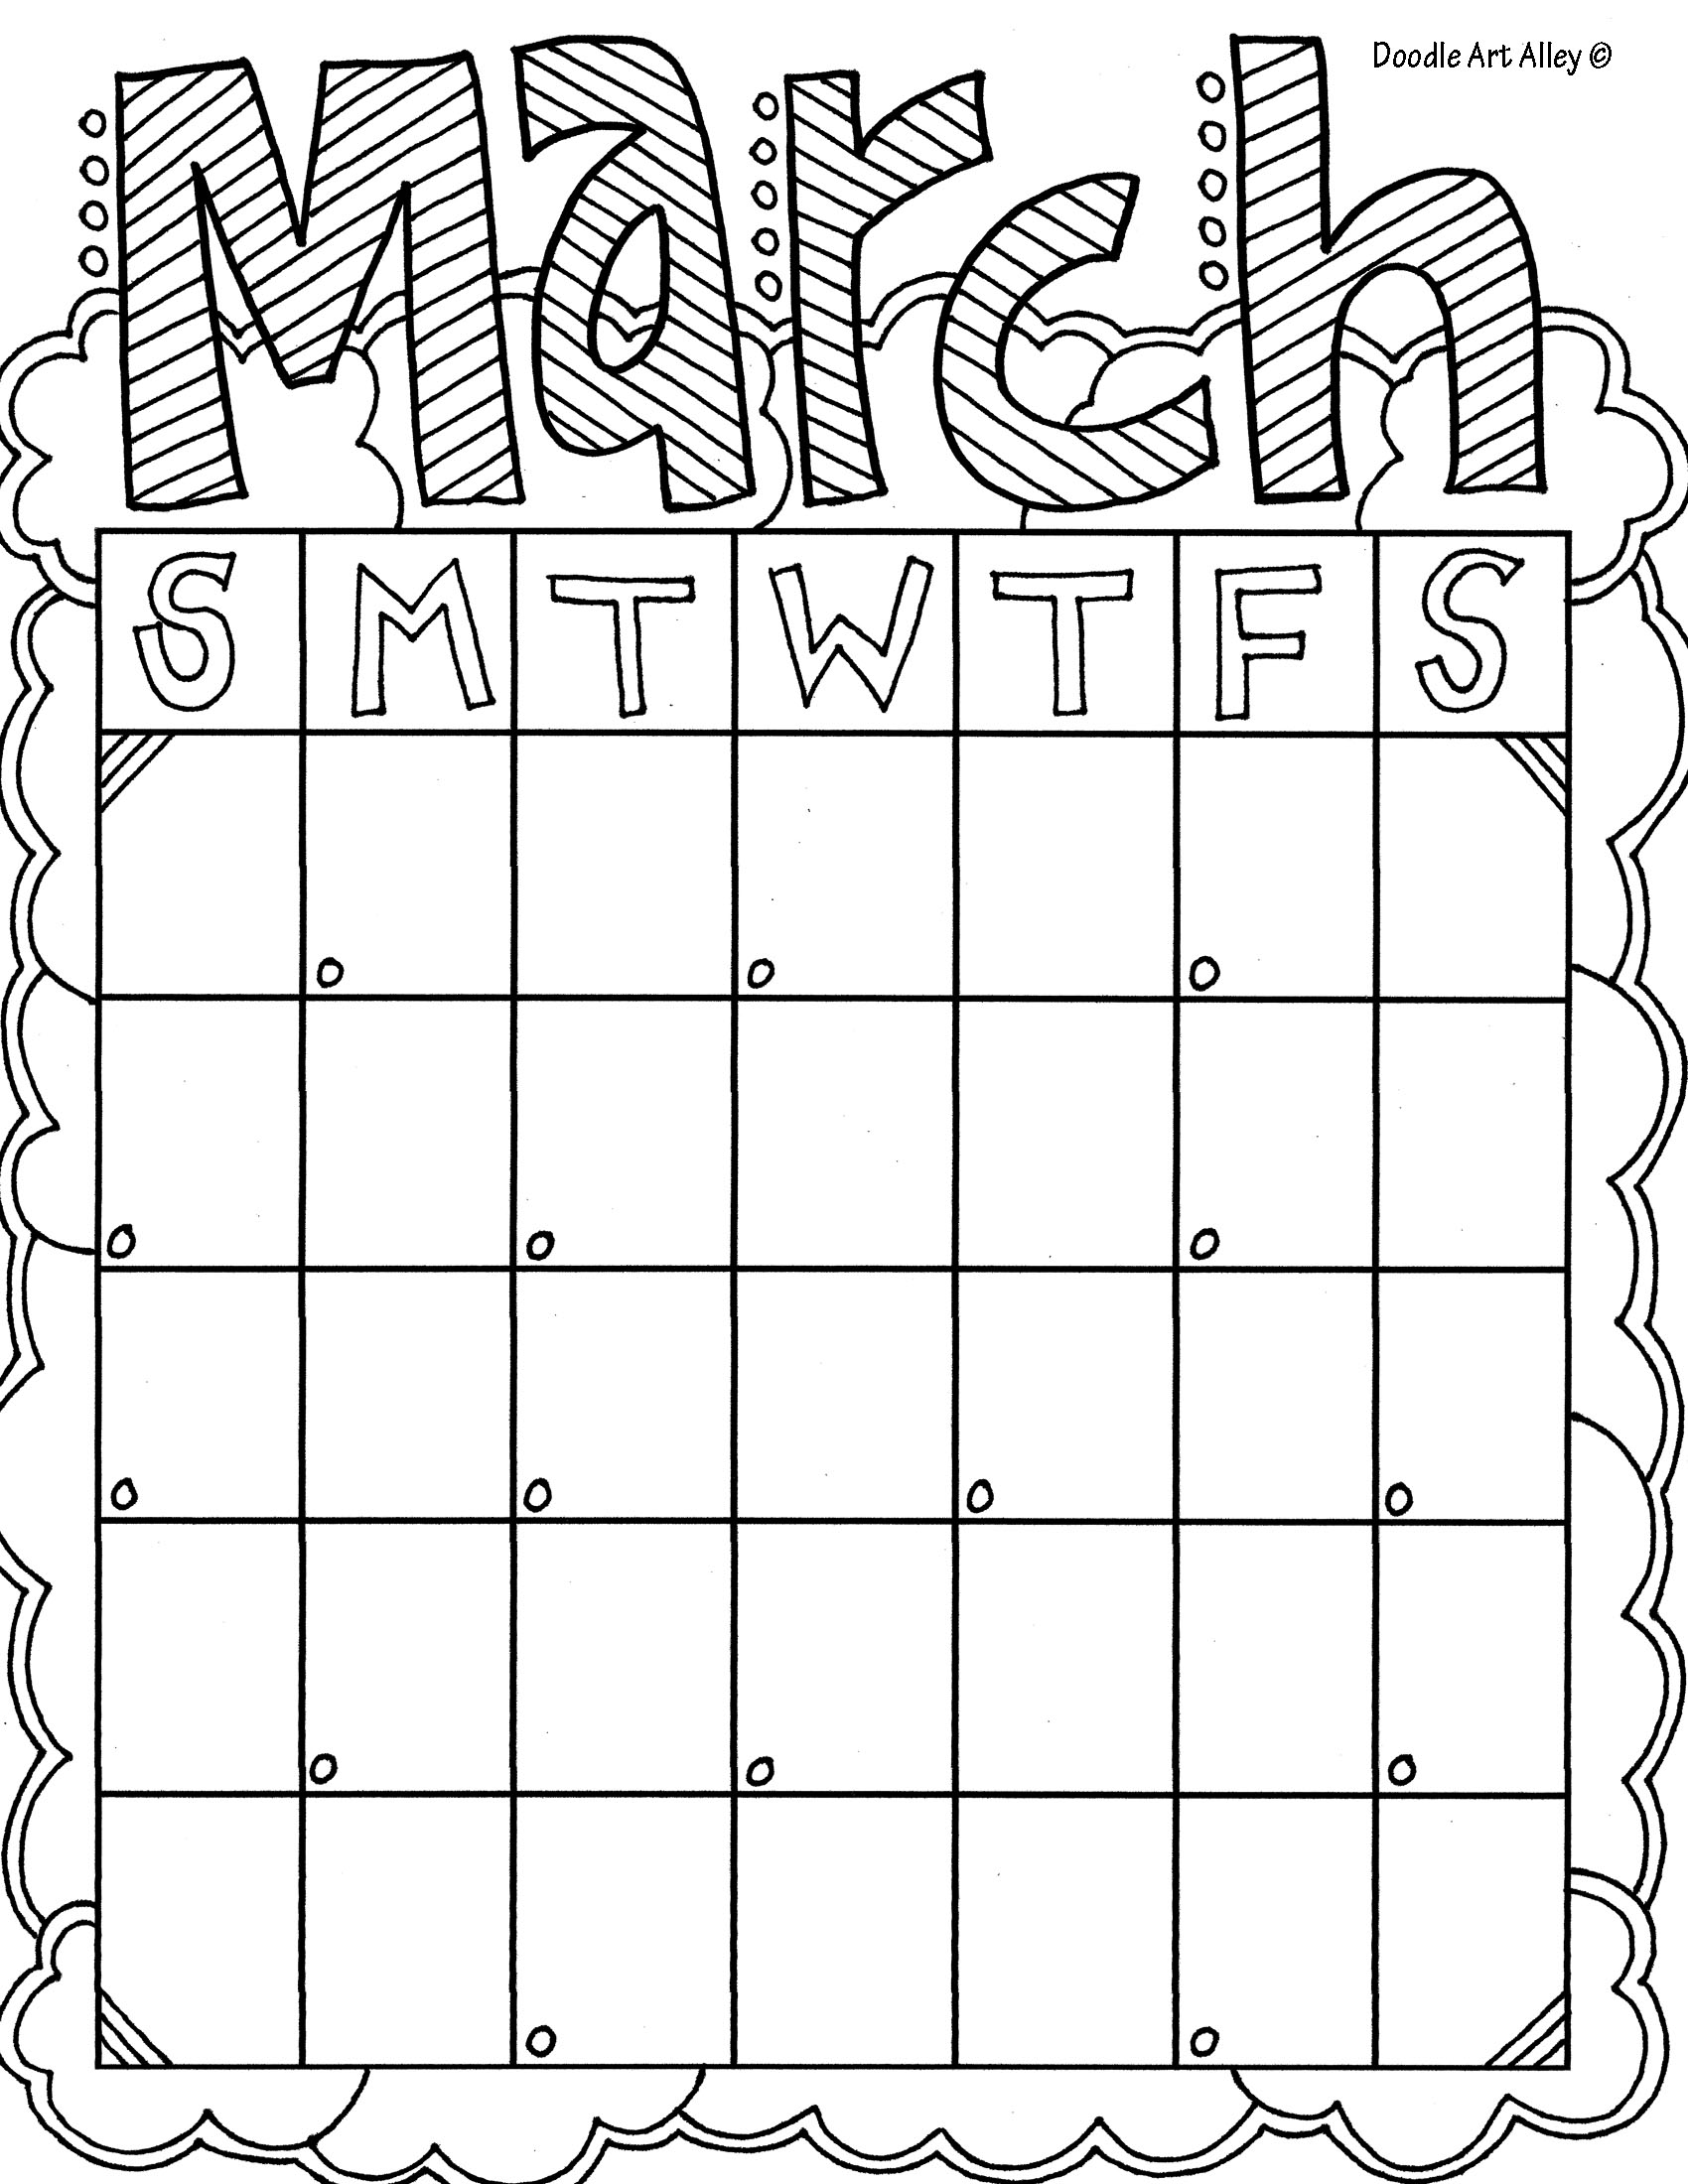 march-coloring-pages-doodle-art-alley